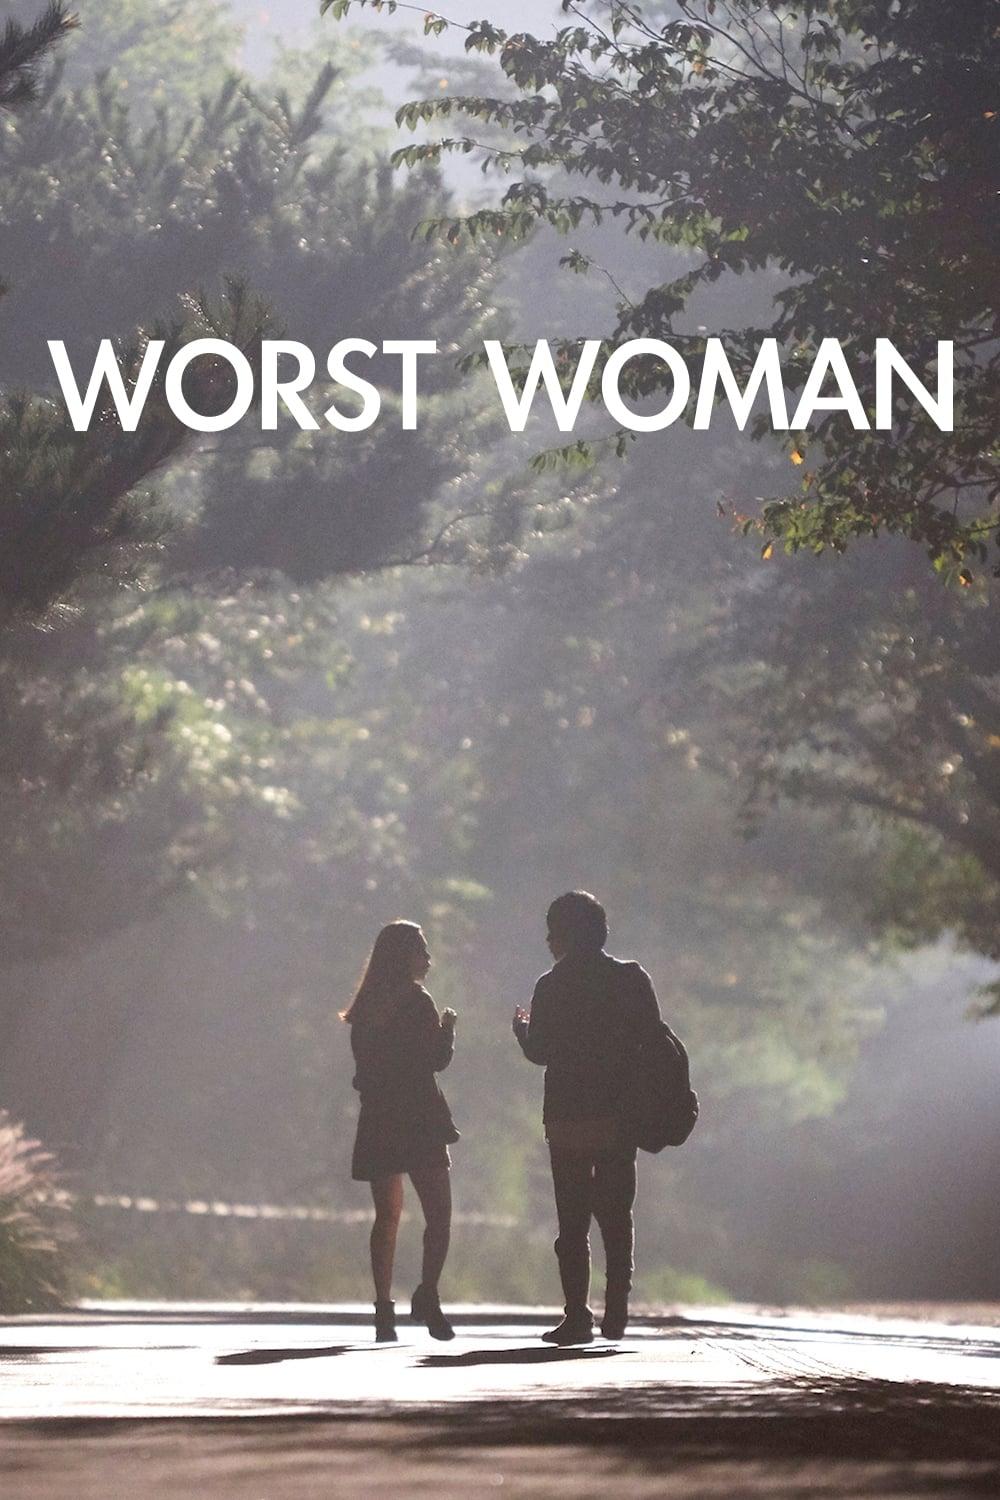 Worst Woman poster